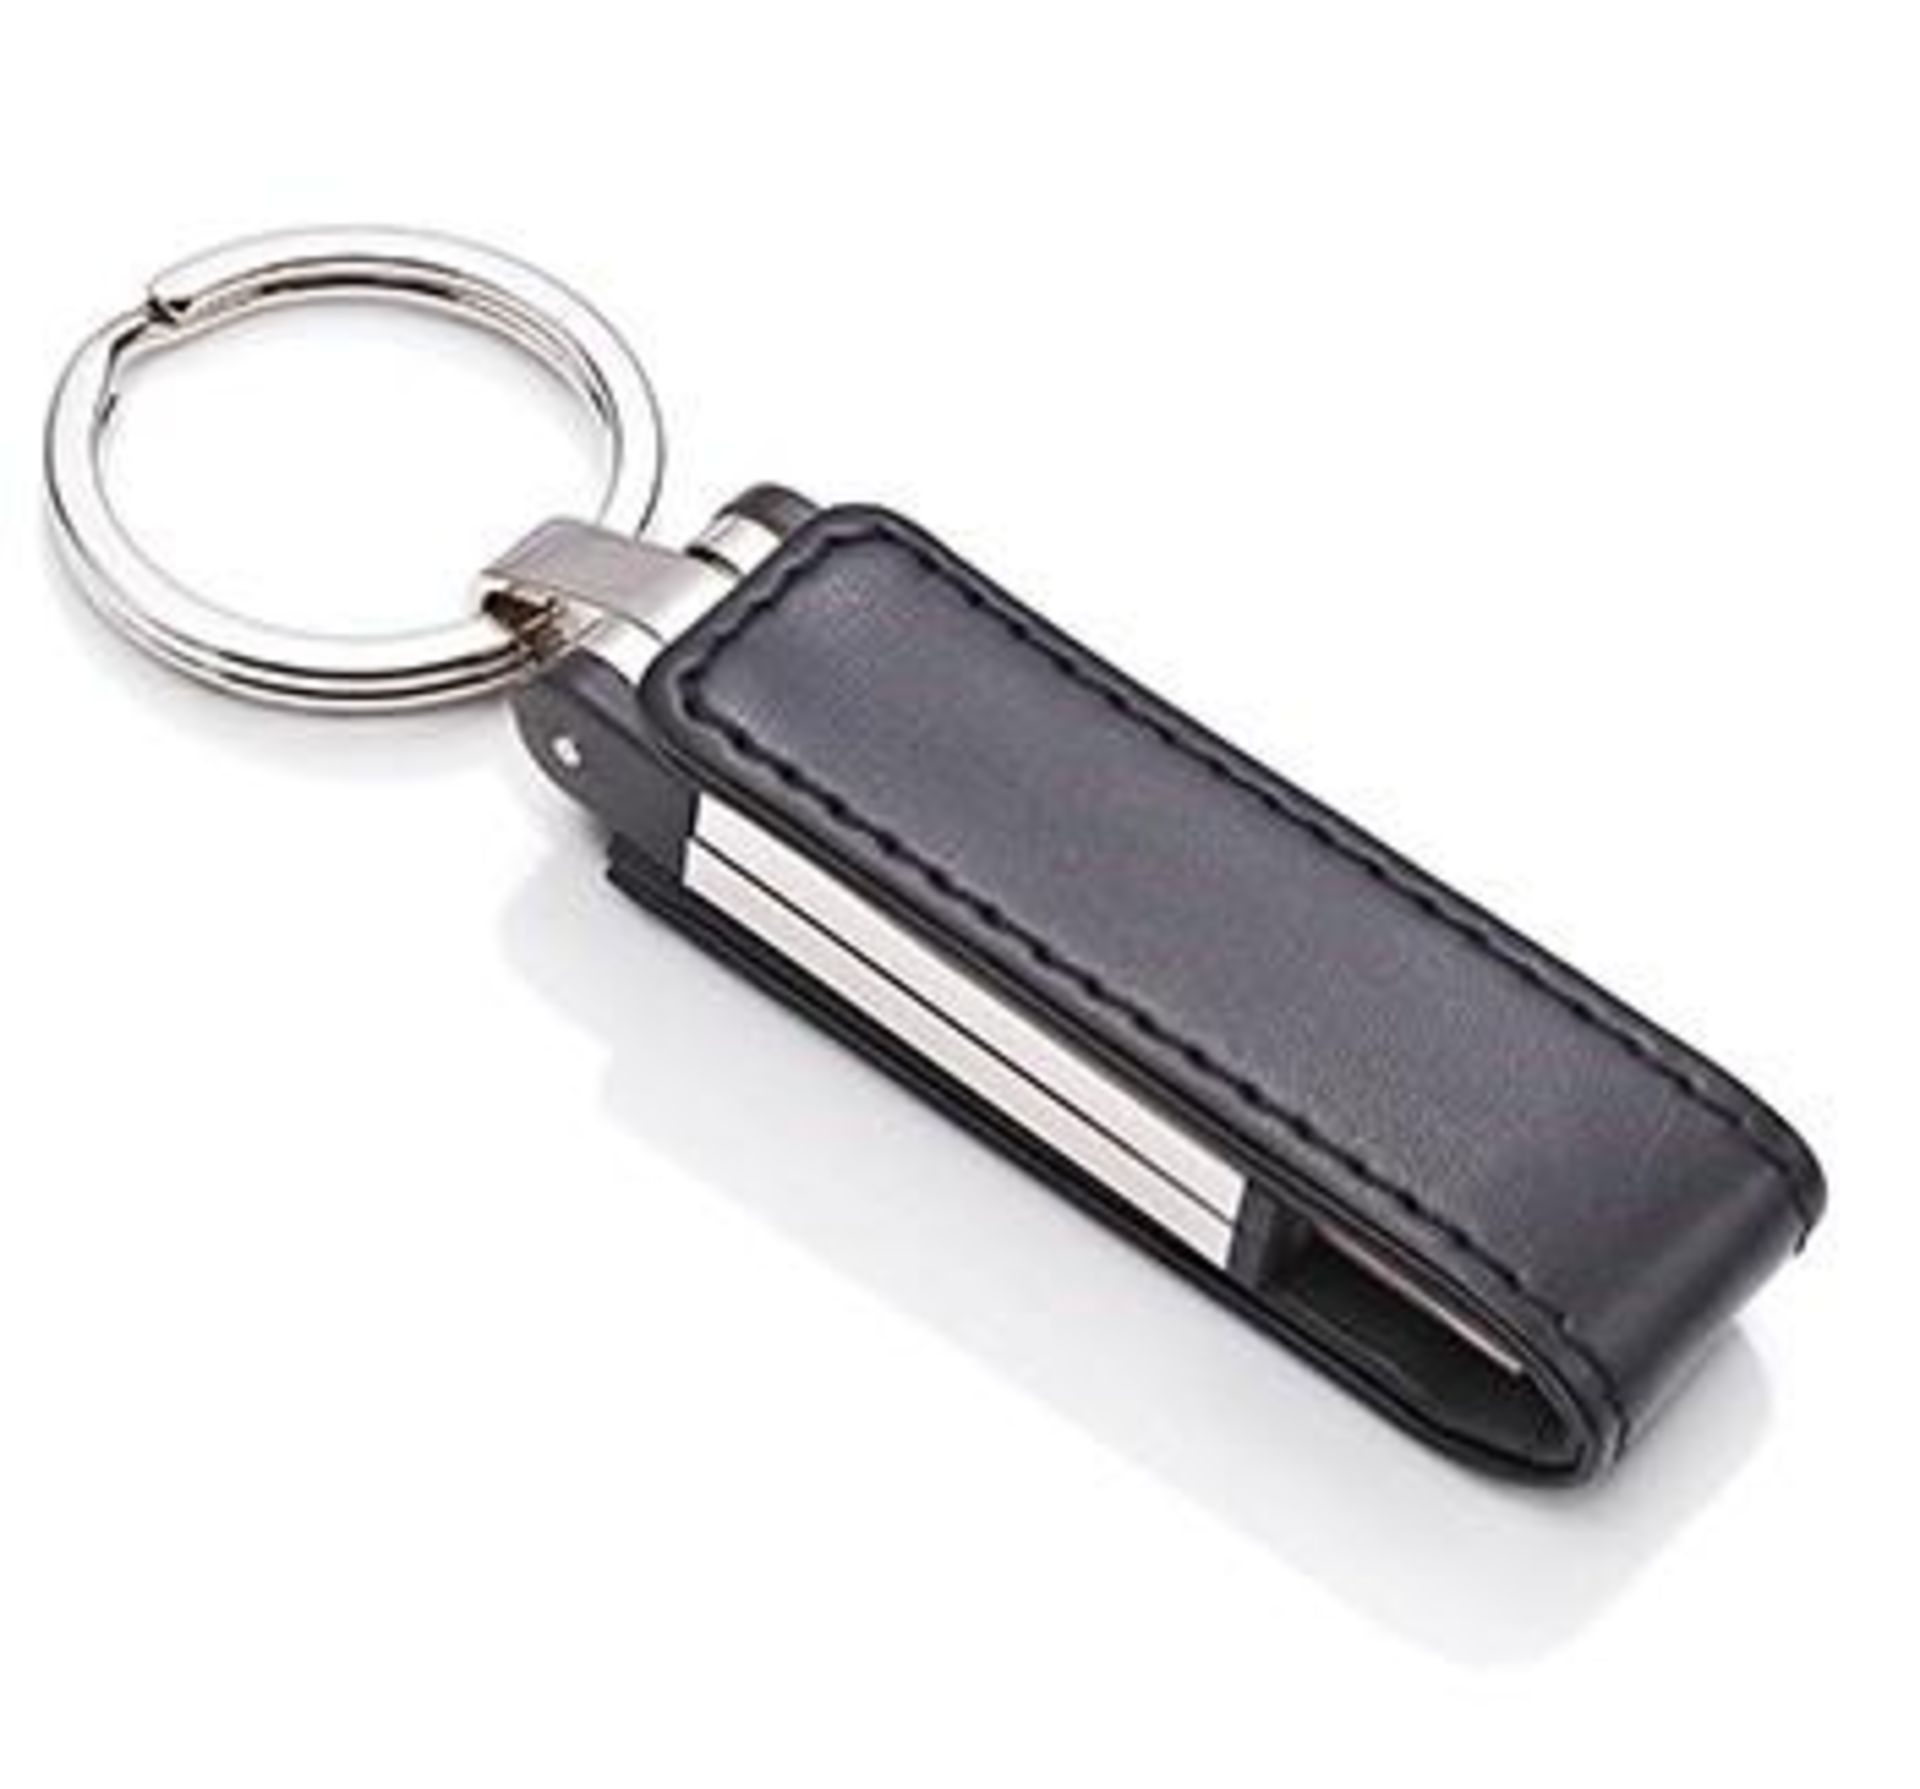 1 x ICE London Silver Plated 2GB USB Flashdrive Keyring - Features A Genuine Leather Wrap With - Image 5 of 6